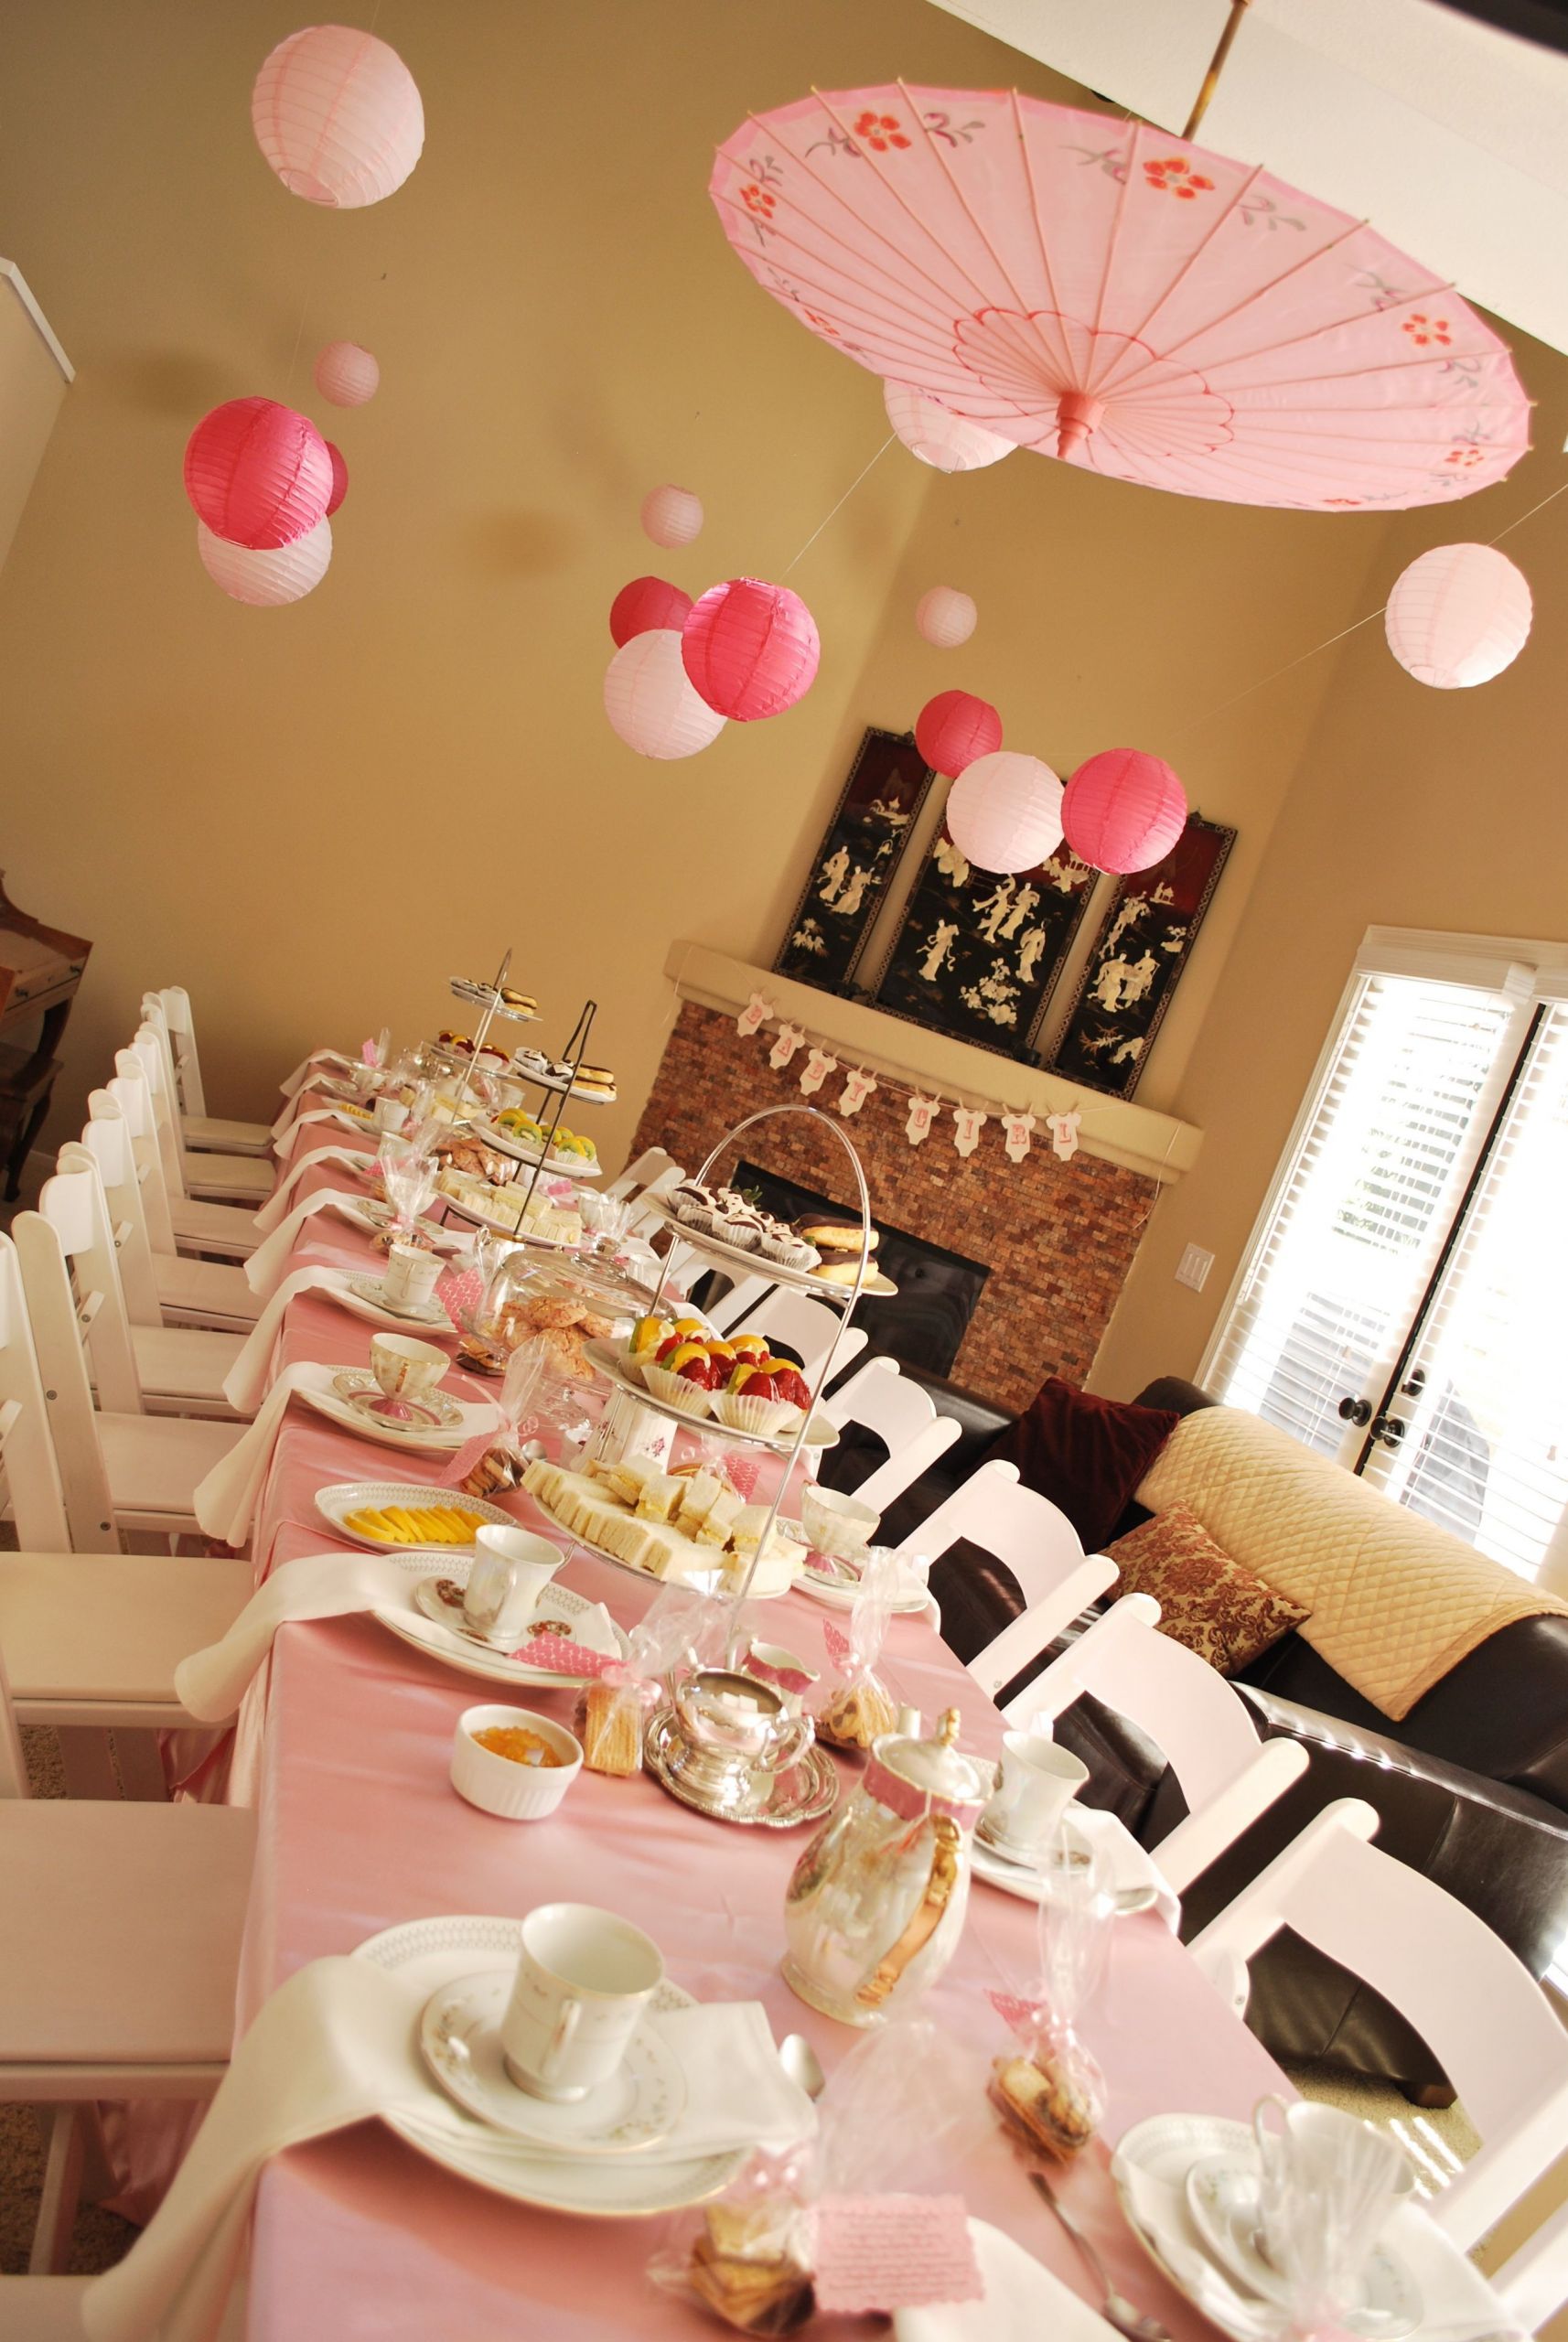 Tea Party Themed Baby Shower Ideas
 Tea Party Baby Shower t sure abt the Asian umbrella